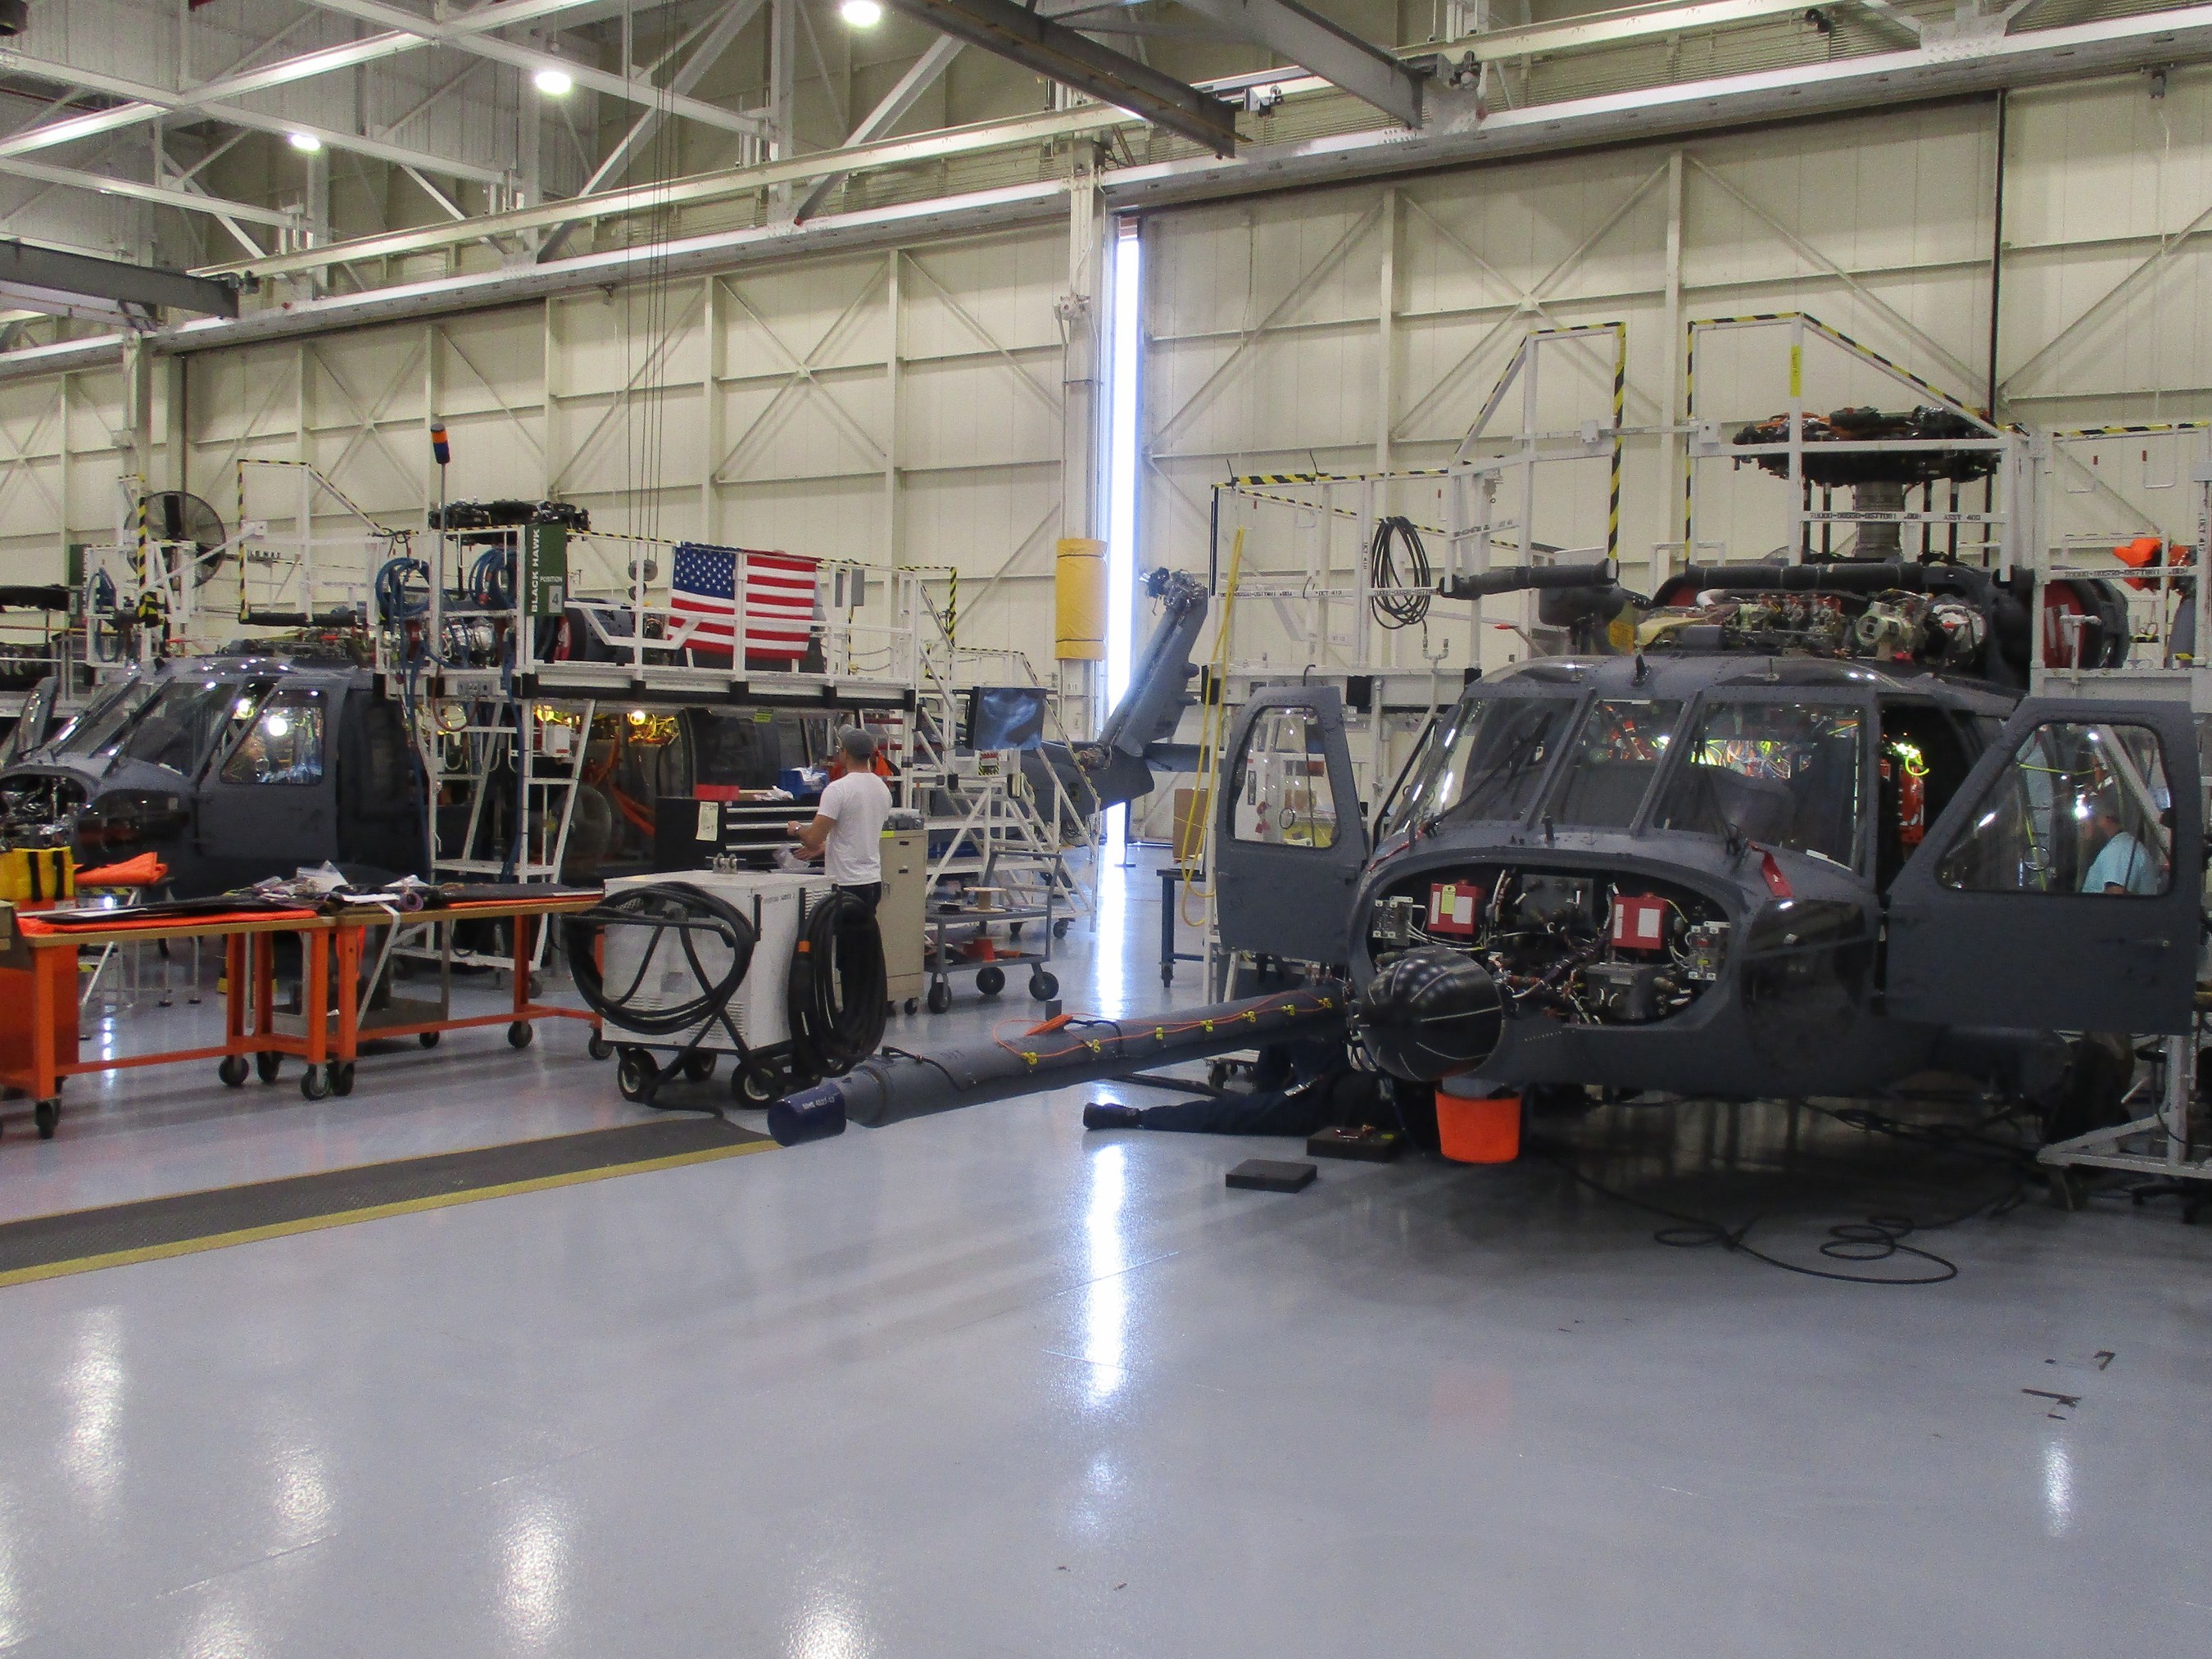 Two HH-60W Combat Rescue Helicopters are at the Sikorsky Development Flight Center in West Palm Beach, Florida, in preparation for flight test